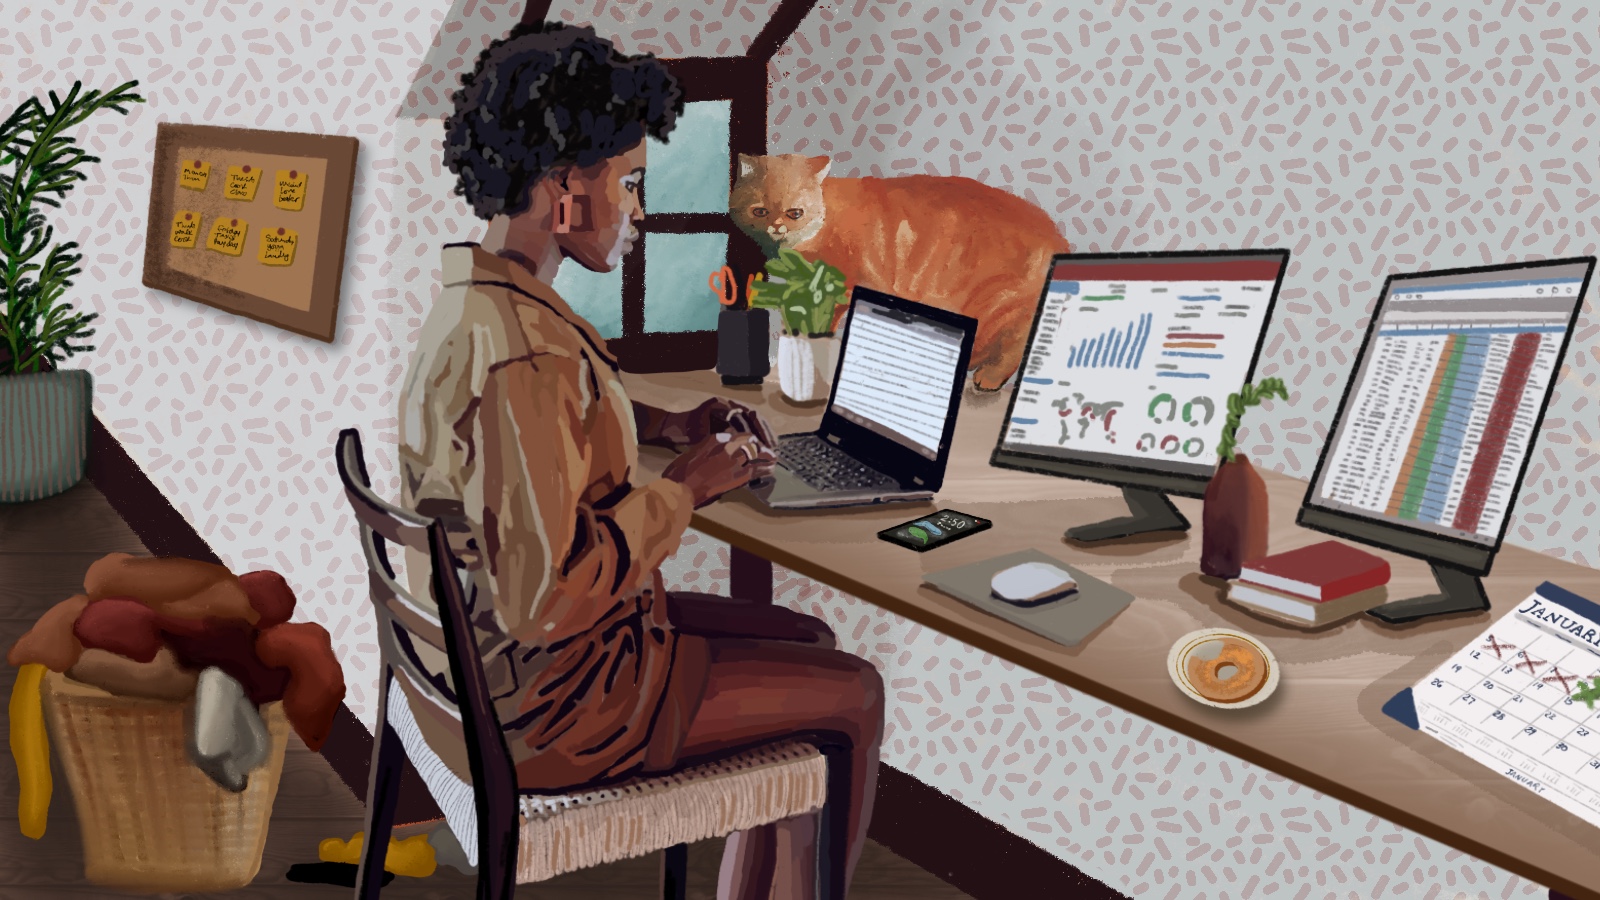 A woman sits at a desk in a home office, reviewing charts on a screen while a cat lingers on the desk.